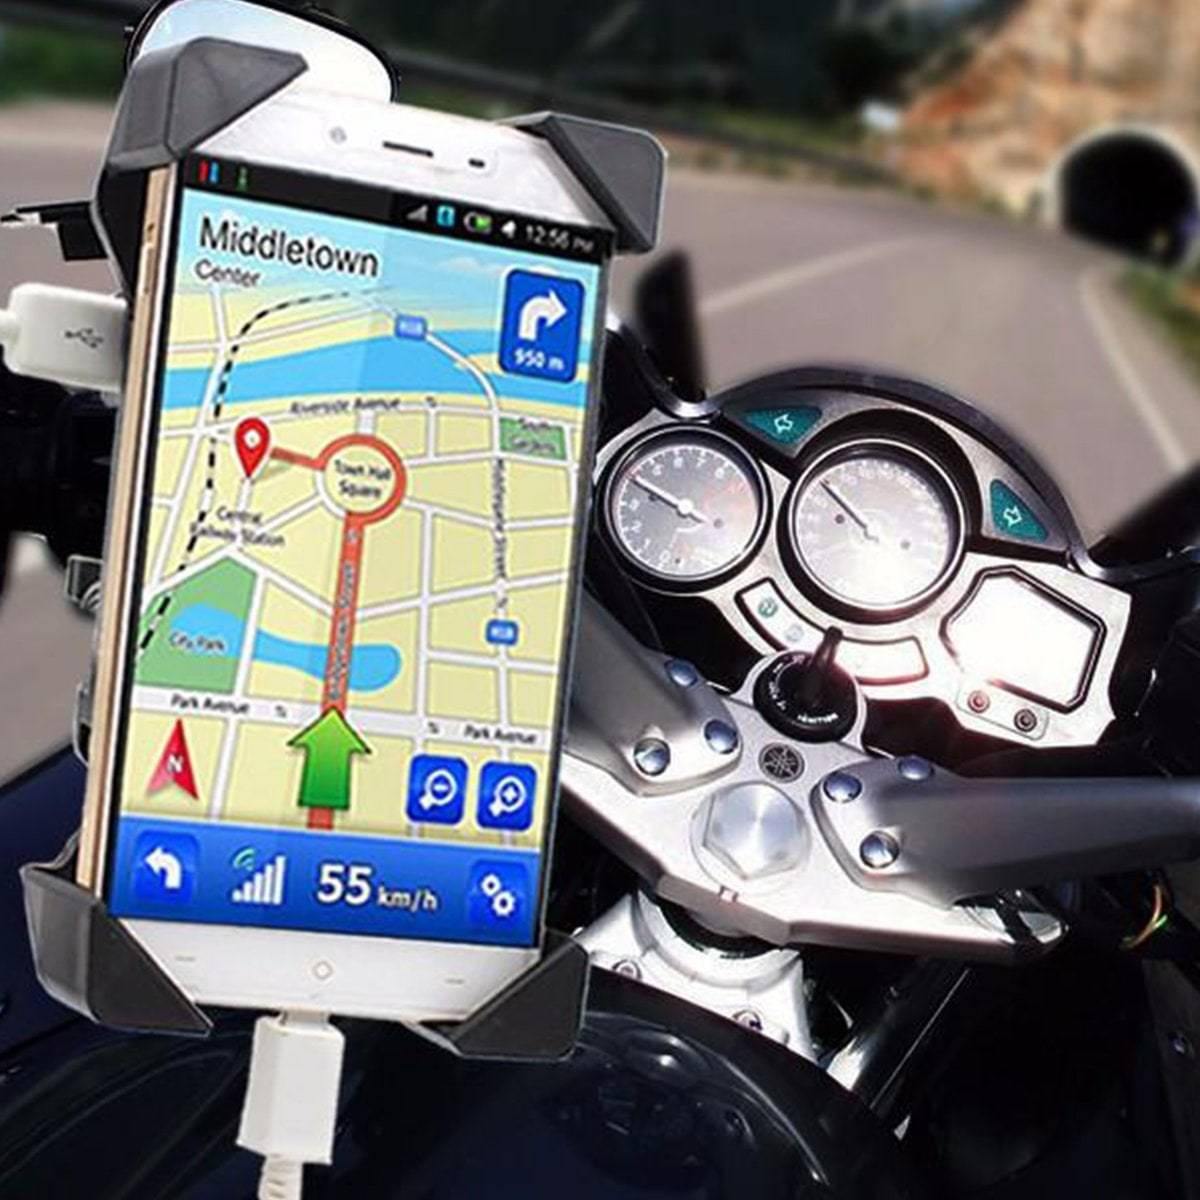 Motorcycle Phone Mount Holder with USB Charger Port, 3.5-7" Screen Fit, Universal for 7/8" Handlebar - American Legend Rider